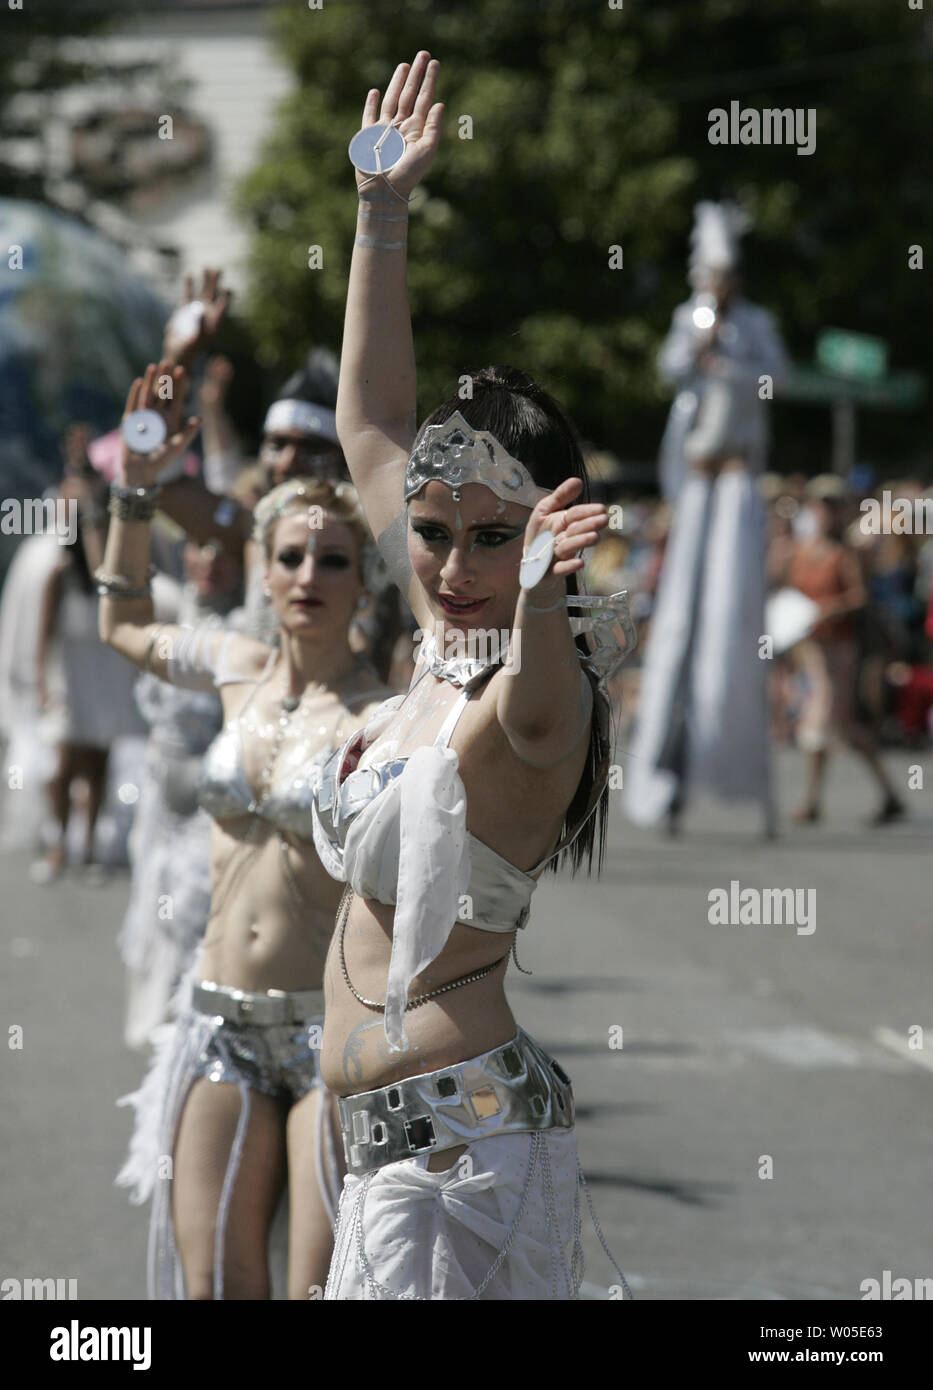 Dancers perform during the 25th annual Fremont Summer Solstice Parade in Seattle on June 22, 2013.     UPI/Jim Bryant Stock Photo